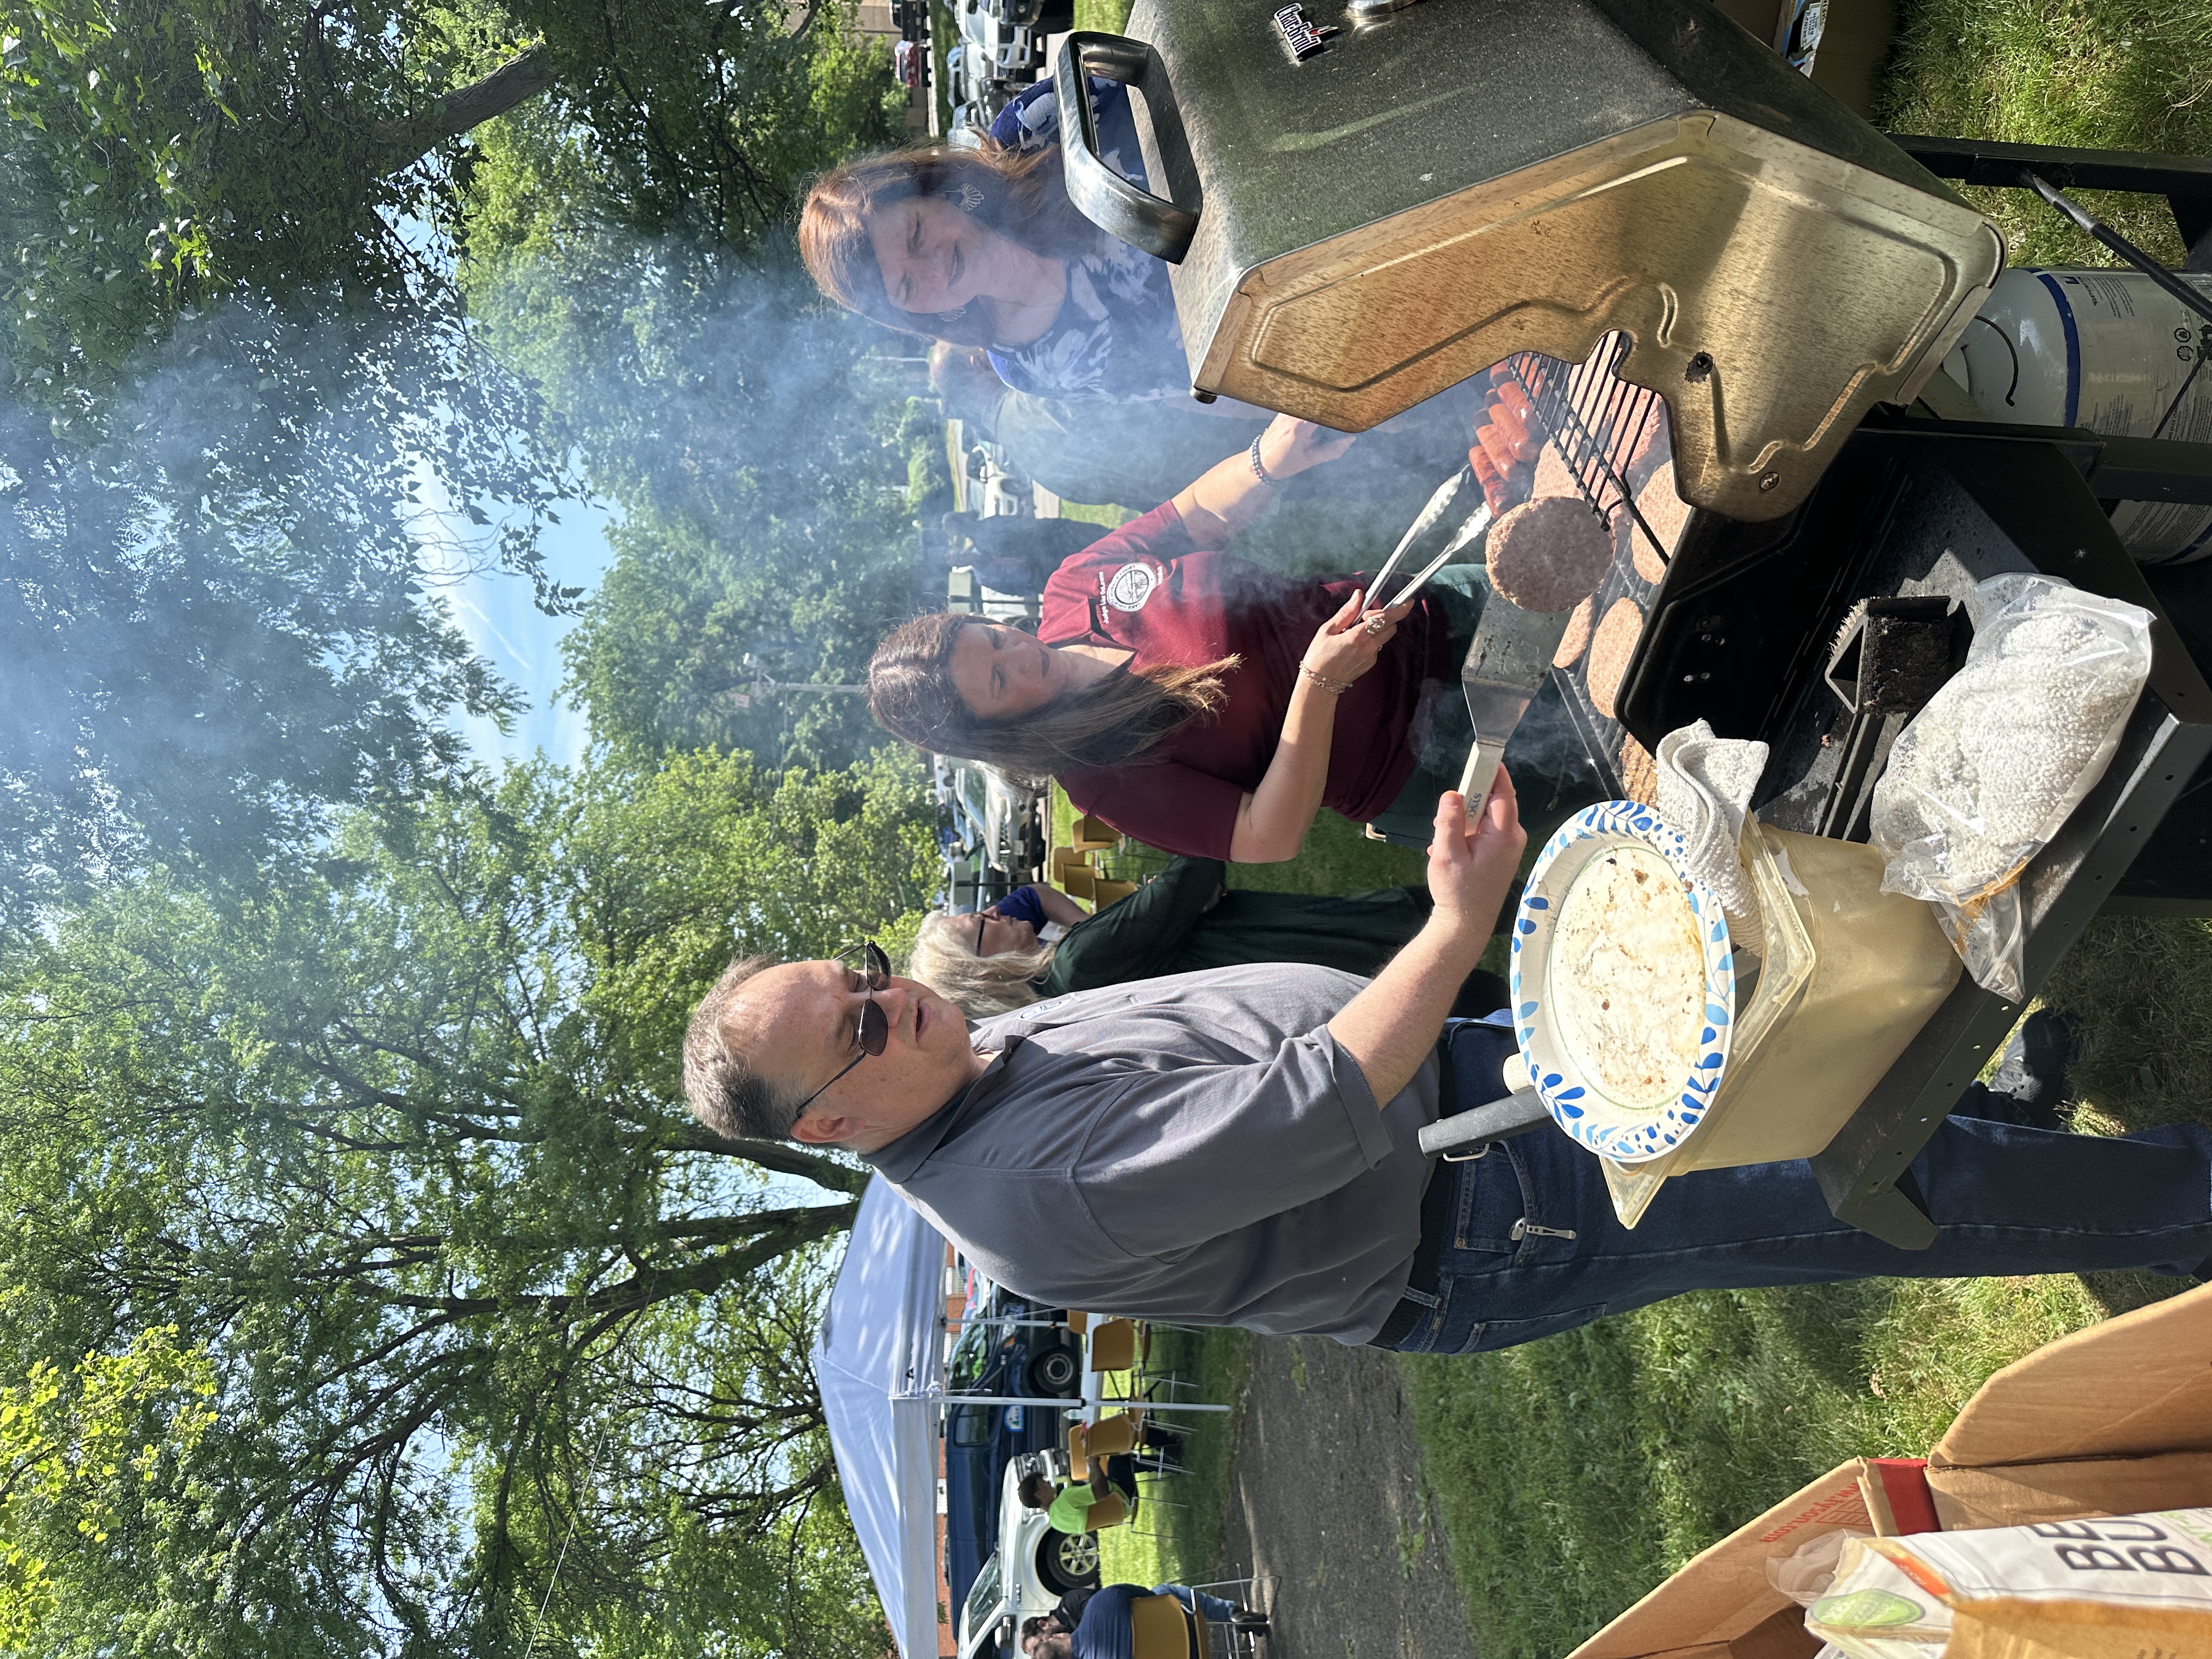 Judge DeLeone working the grill for the Juvenile Court's Memorial Day Cookout